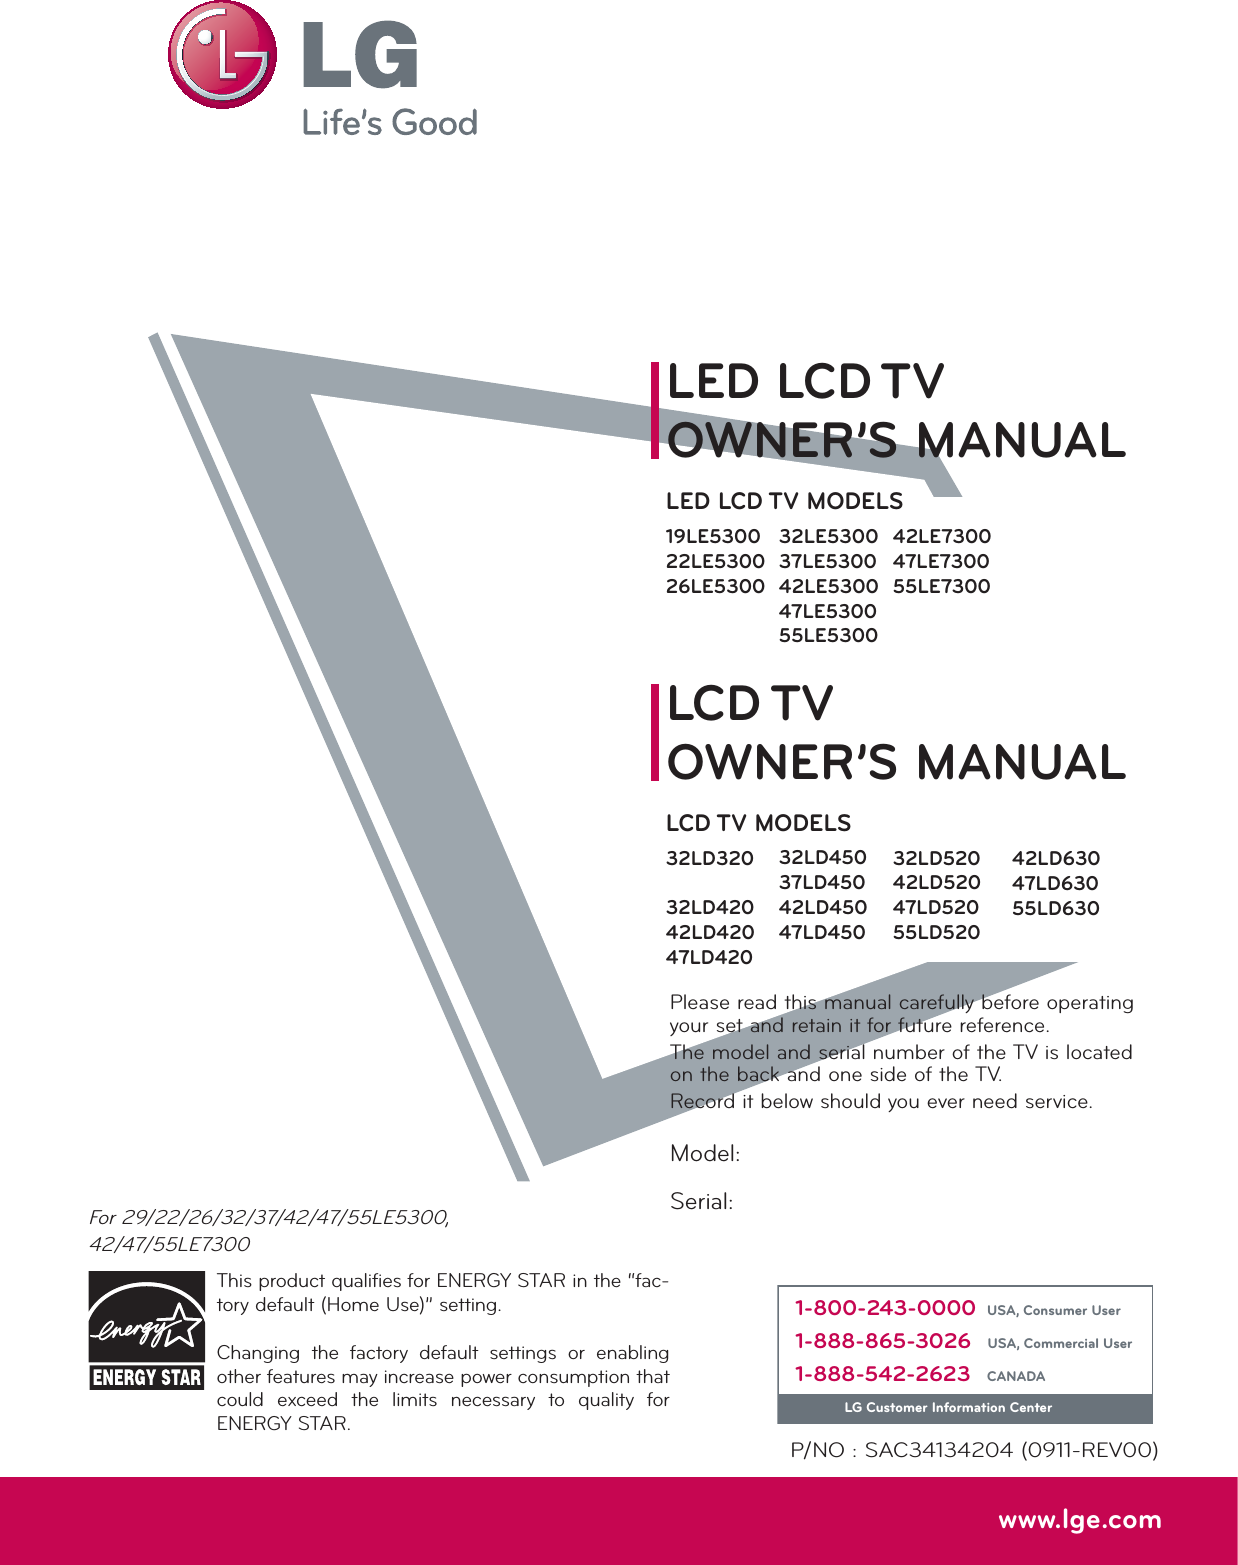 Please read this manual carefully before operating your set and retain it for future reference.The model and serial number of the TV is located on the back and one side of the TV. Record it below should you ever need service.P/NO : SAC34134204 (0911-REV00)www.lge.comThis product qualifies for ENERGY STAR in the “fac-tory default (Home Use)” setting.Changing the factory default settings or enabling other features may increase power consumption that could exceed the limits necessary to quality for ENERGY STAR.Model:Serial:For 29/22/26/32/37/42/47/55LE5300,42/47/55LE73001-800-243-0000 USA, Consumer User1-888-865-3026 USA, Commercial User1-888-542-2623 CANADALG Customer Information CenterLCD TVLED LCD TVOWNER’S MANUALOWNER’S MANUALLCD TV MODELS32LD32032LD42042LD42047LD42032LD520 42LD52047LD52055LD520LED LCD TV MODELS19LE530022LE530026LE530032LE530037LE530042LE530047LE530055LE530032LD45037LD45042LD45047LD45042LD63047LD63055LD63042LE730047LE730055LE7300